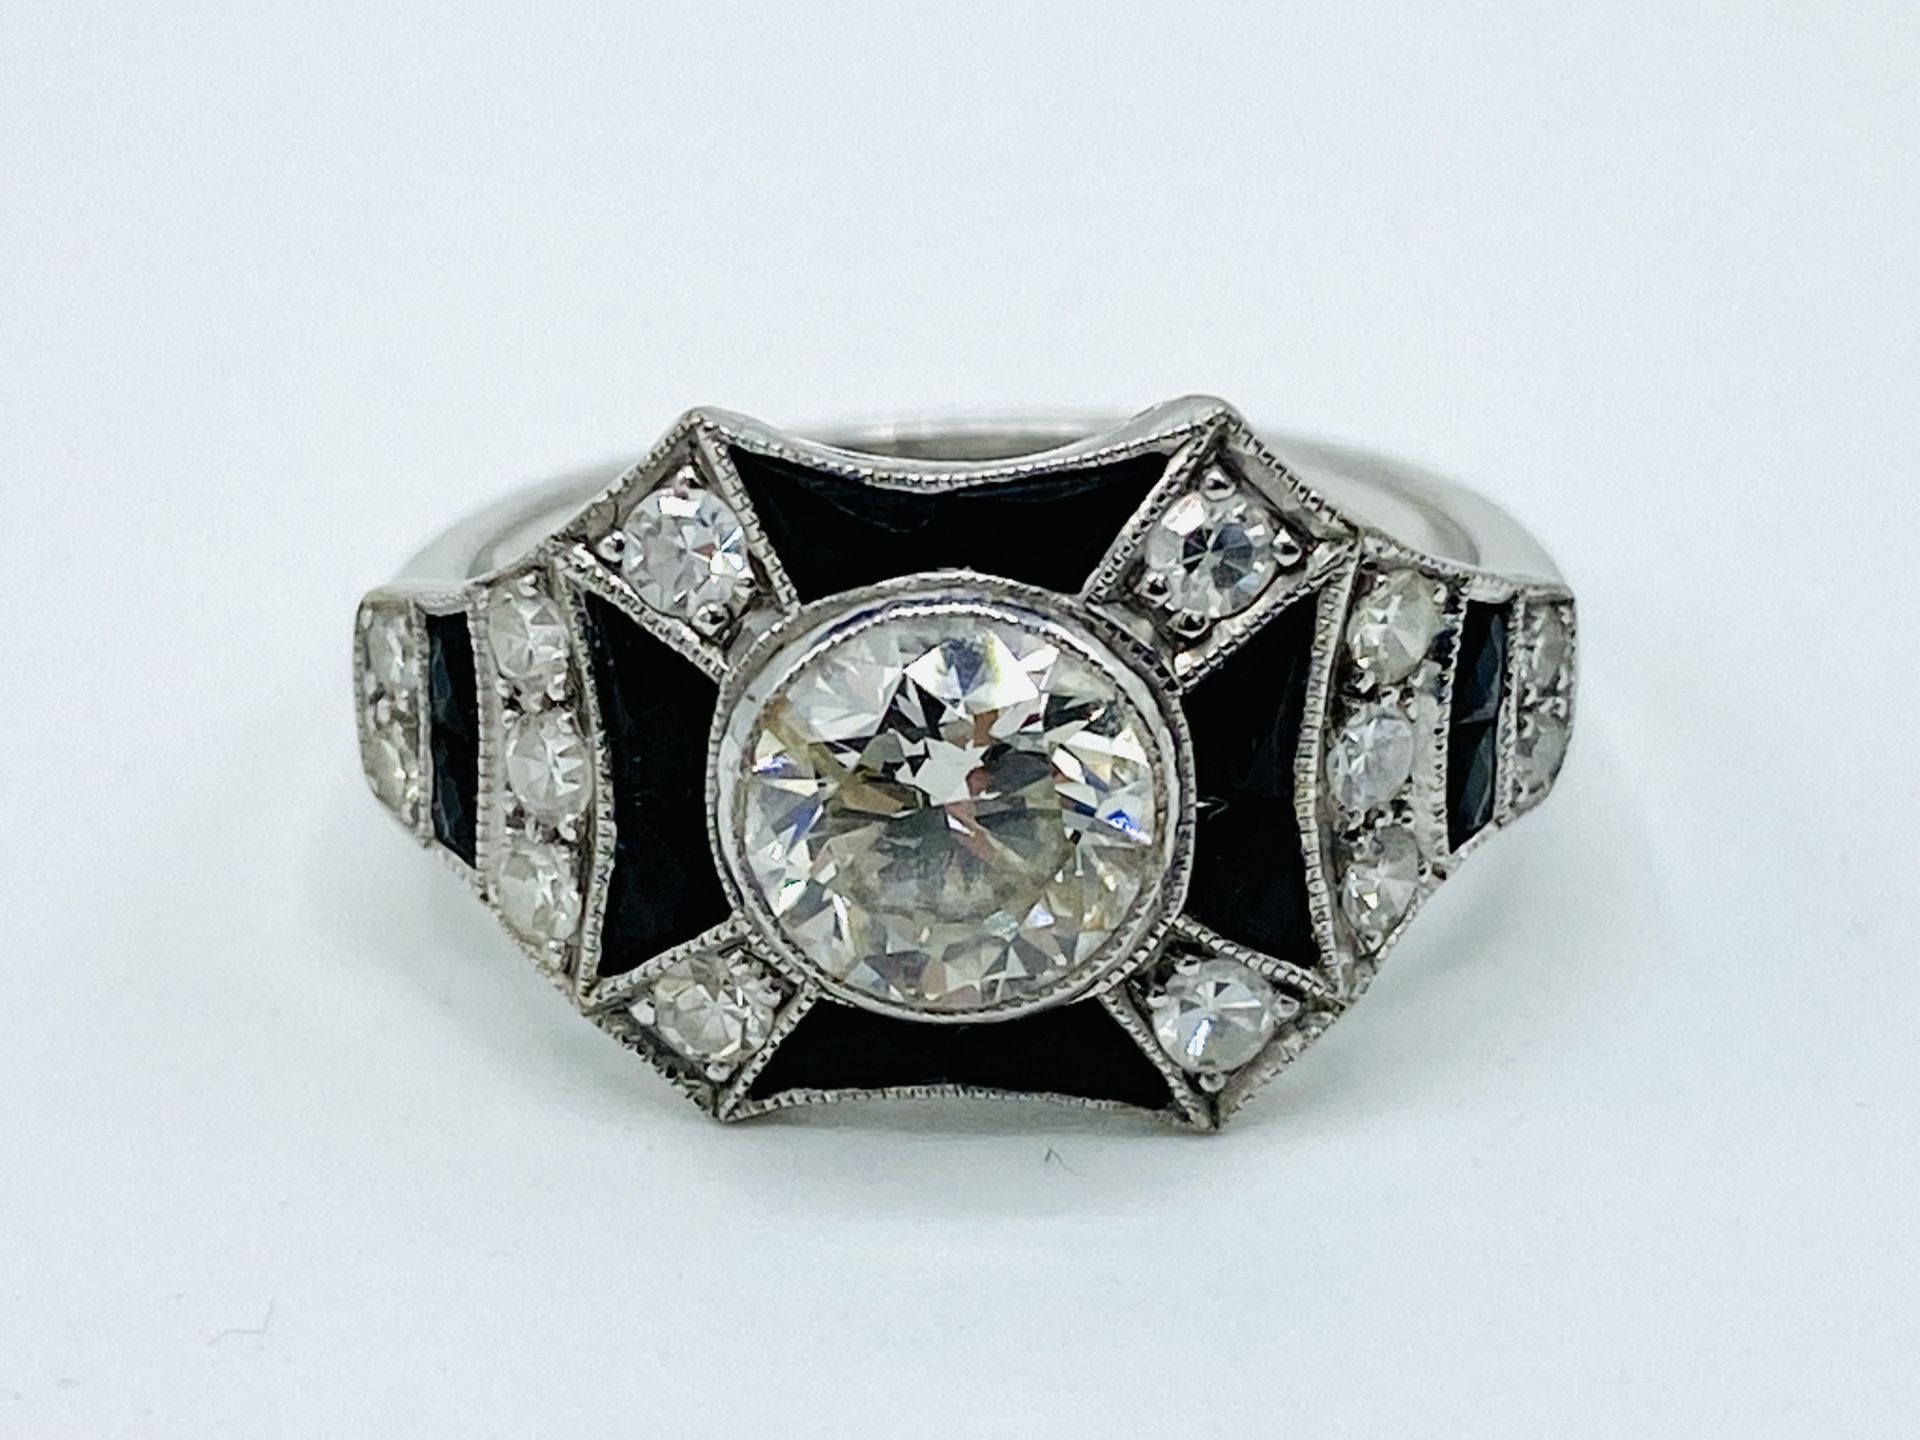 18ct white gold, diamond and black onyx ring - Image 2 of 6